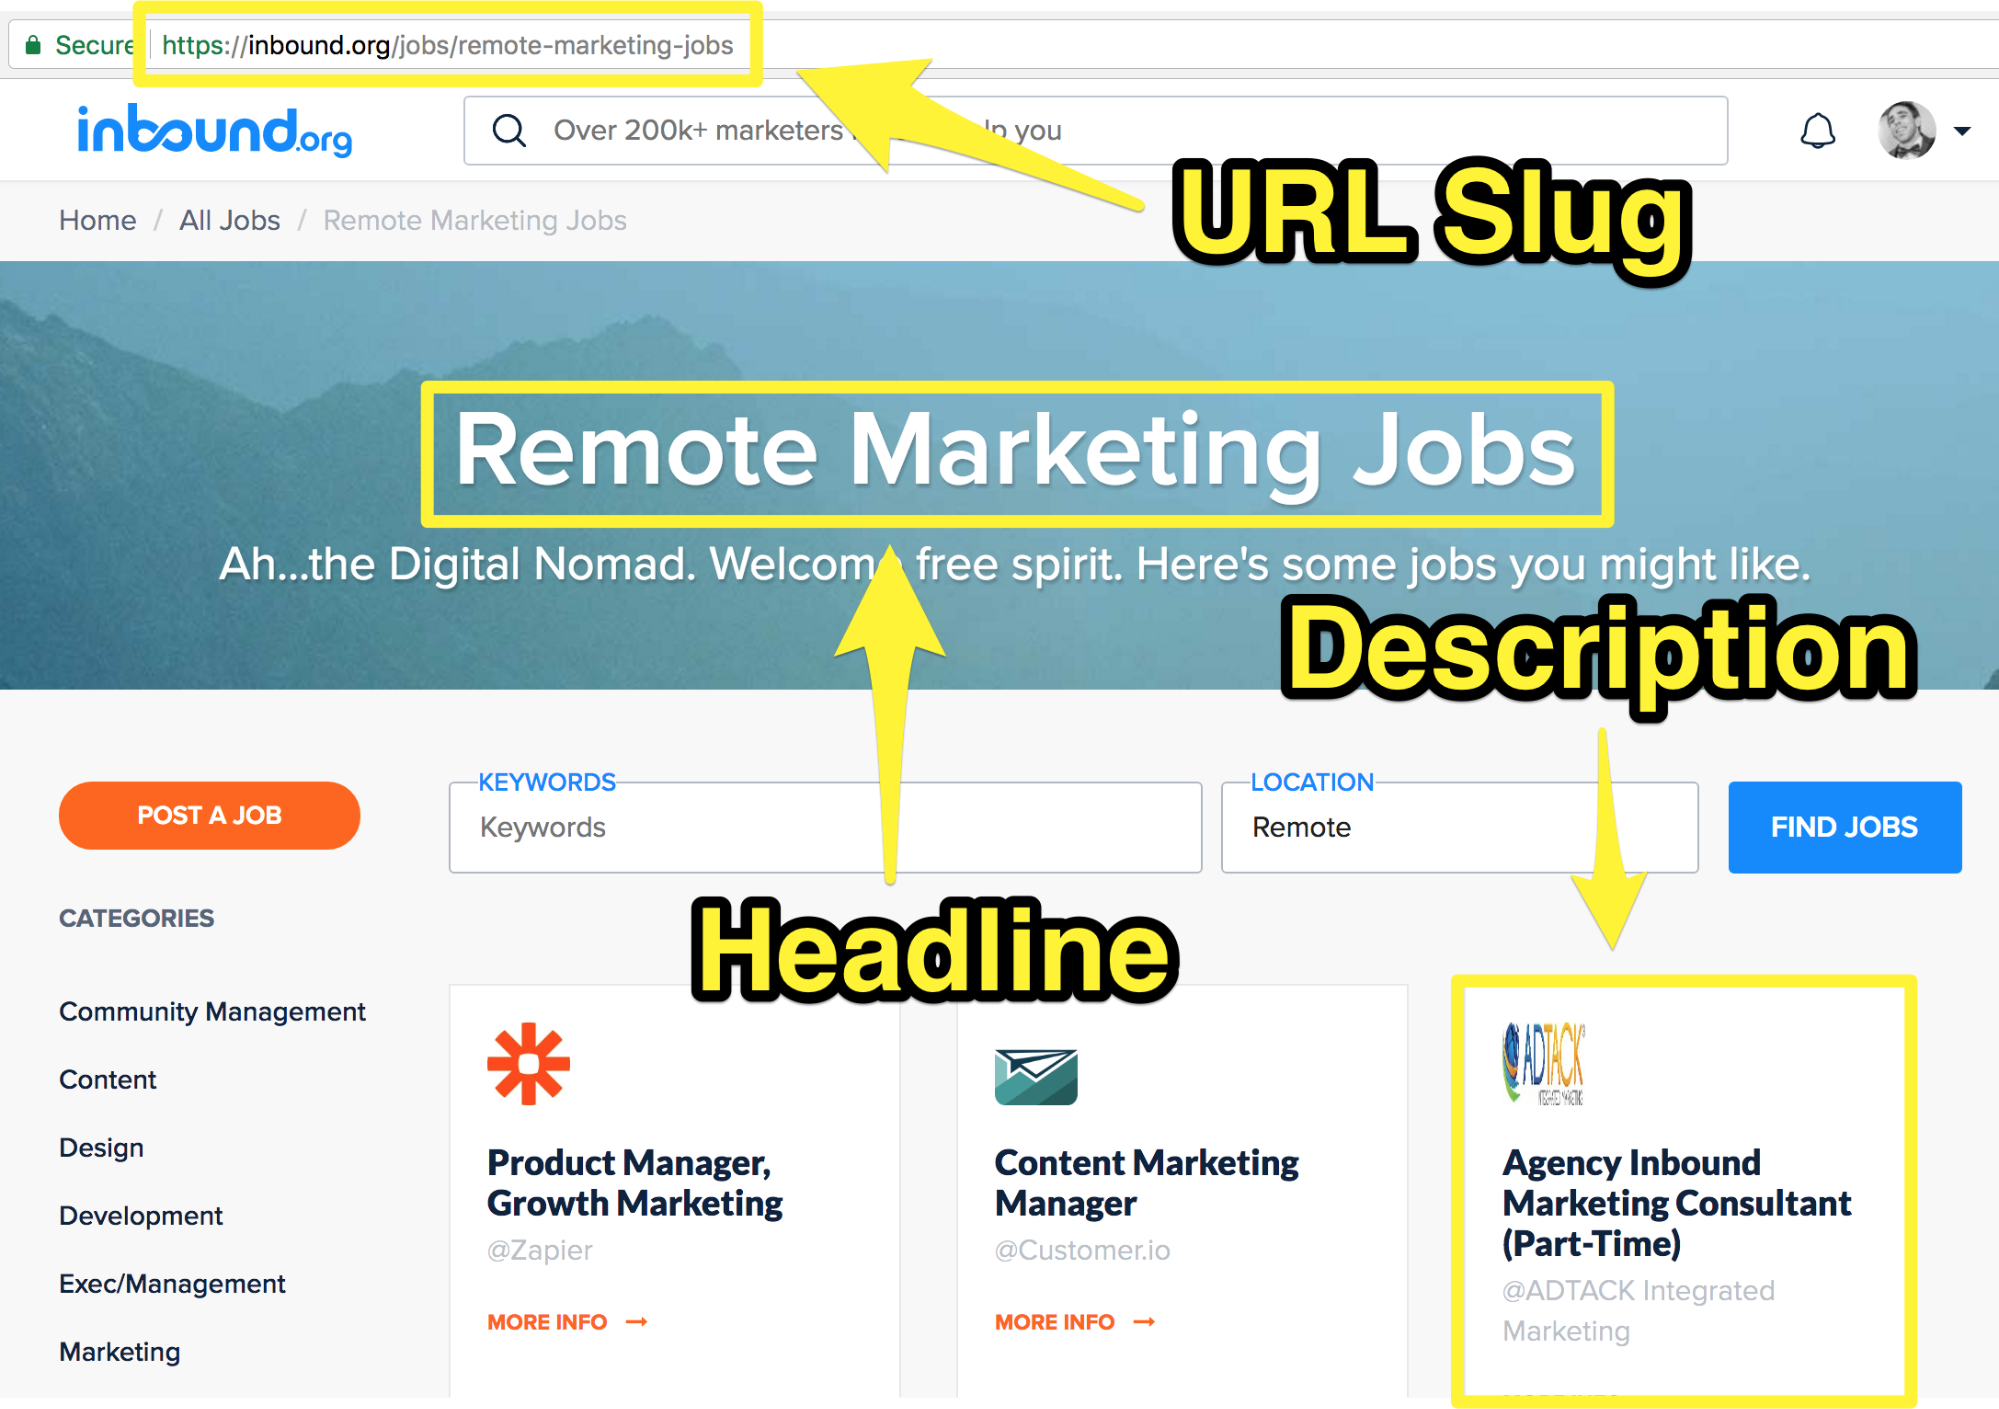 Screenshot showing an inbound.org page for remote marketing jobs